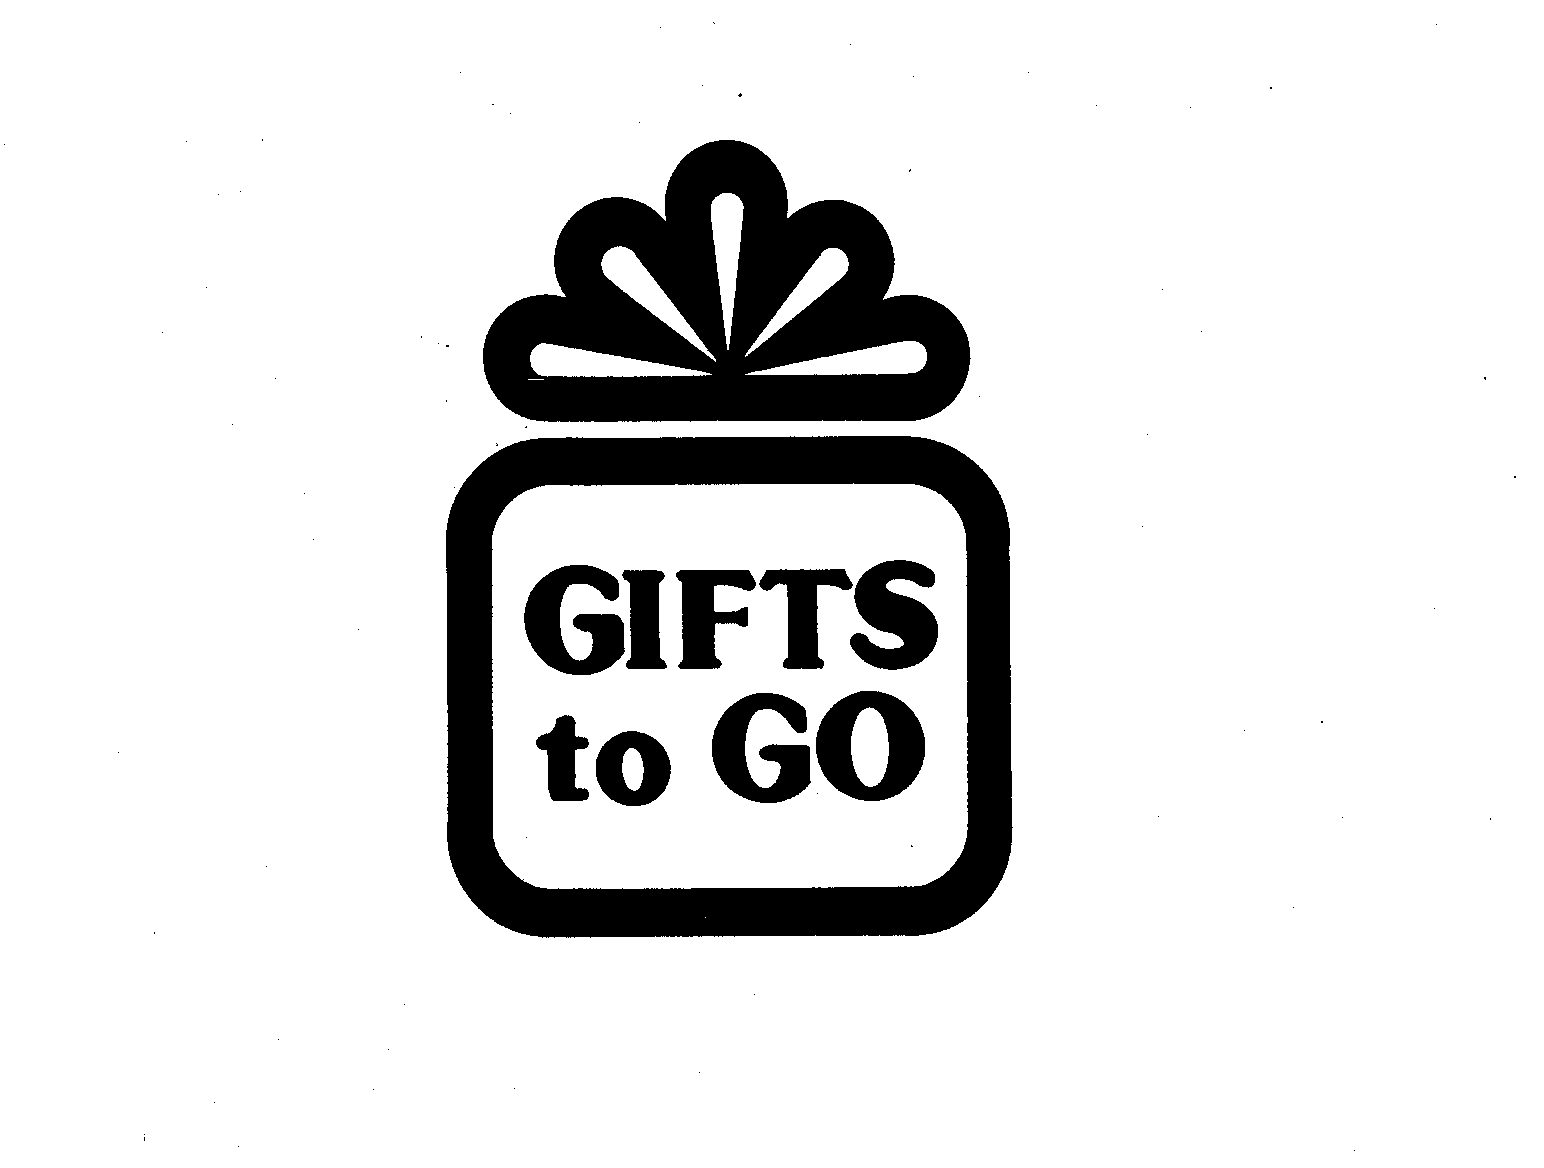 GIFTS TO GO